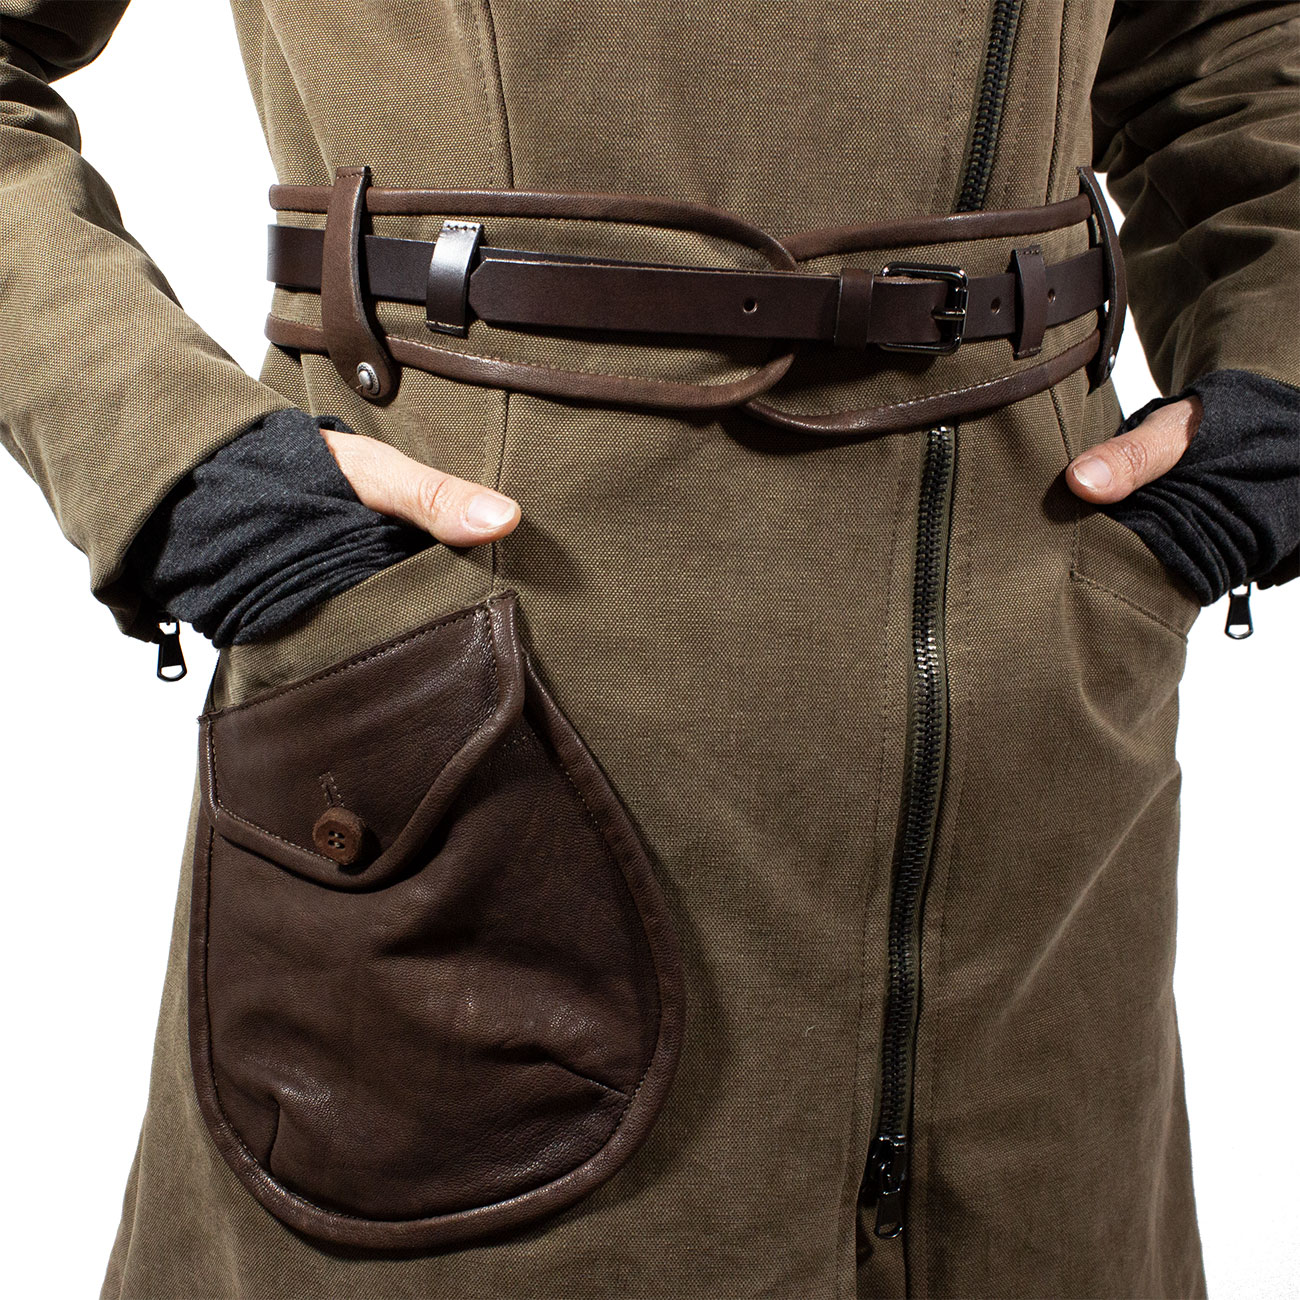 Winter women's jacket Canvas and leather. The inside of the jacket is padded with VALTHERM.